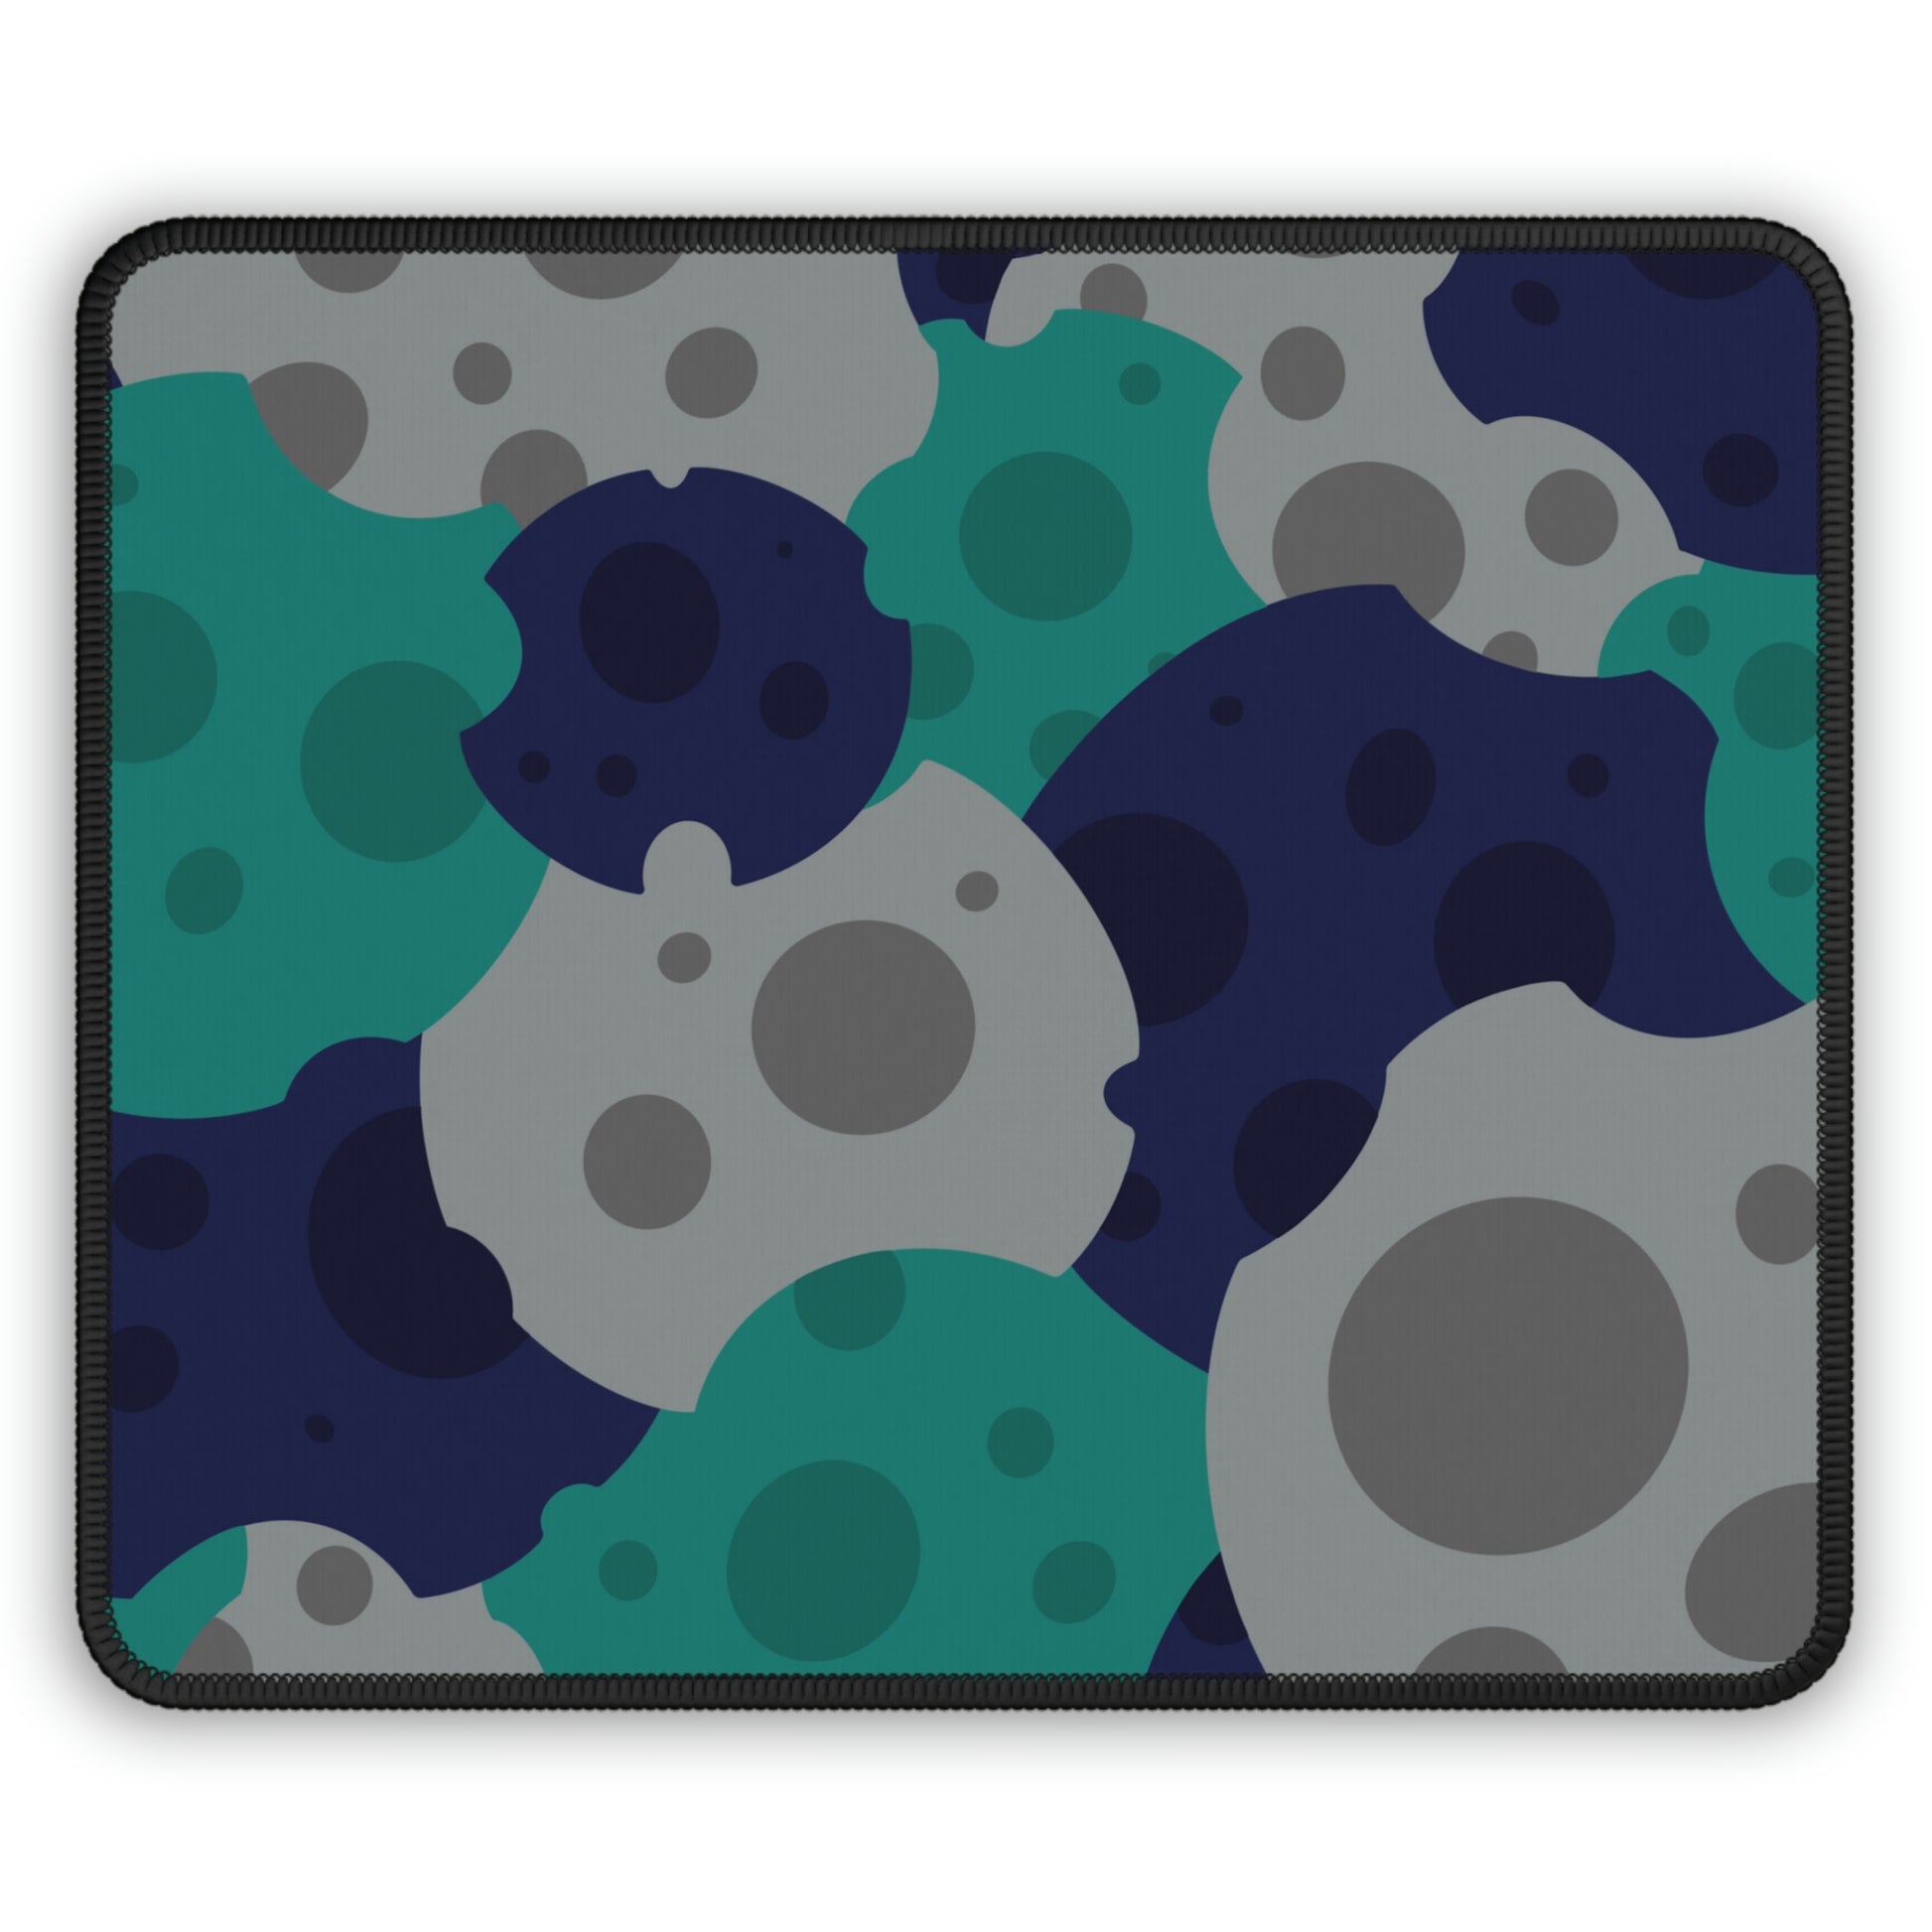 A gaming mouse pad with gray, teal, and dark blue meteorites.